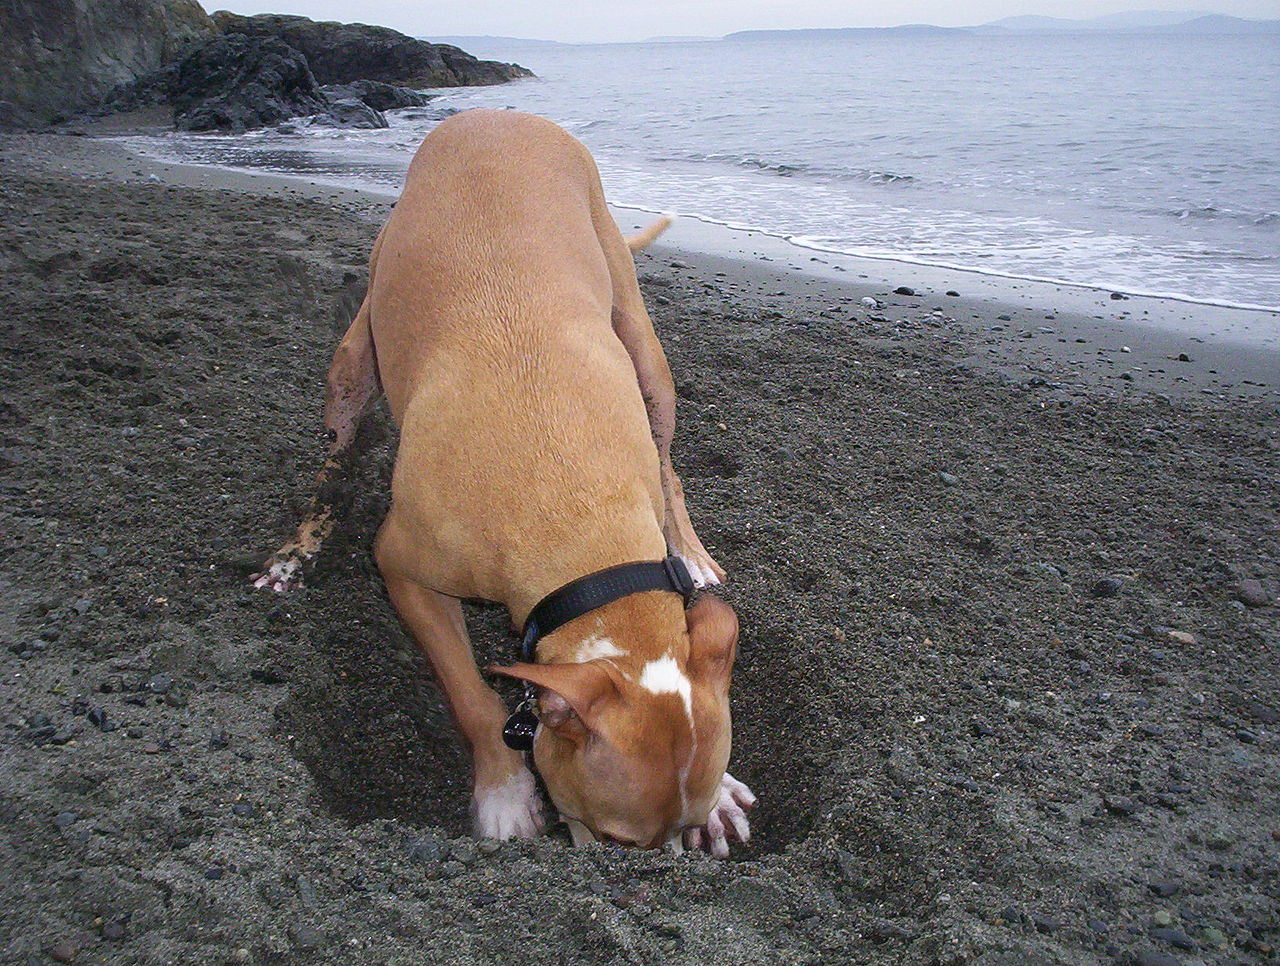 Cute dog digging in the sand.